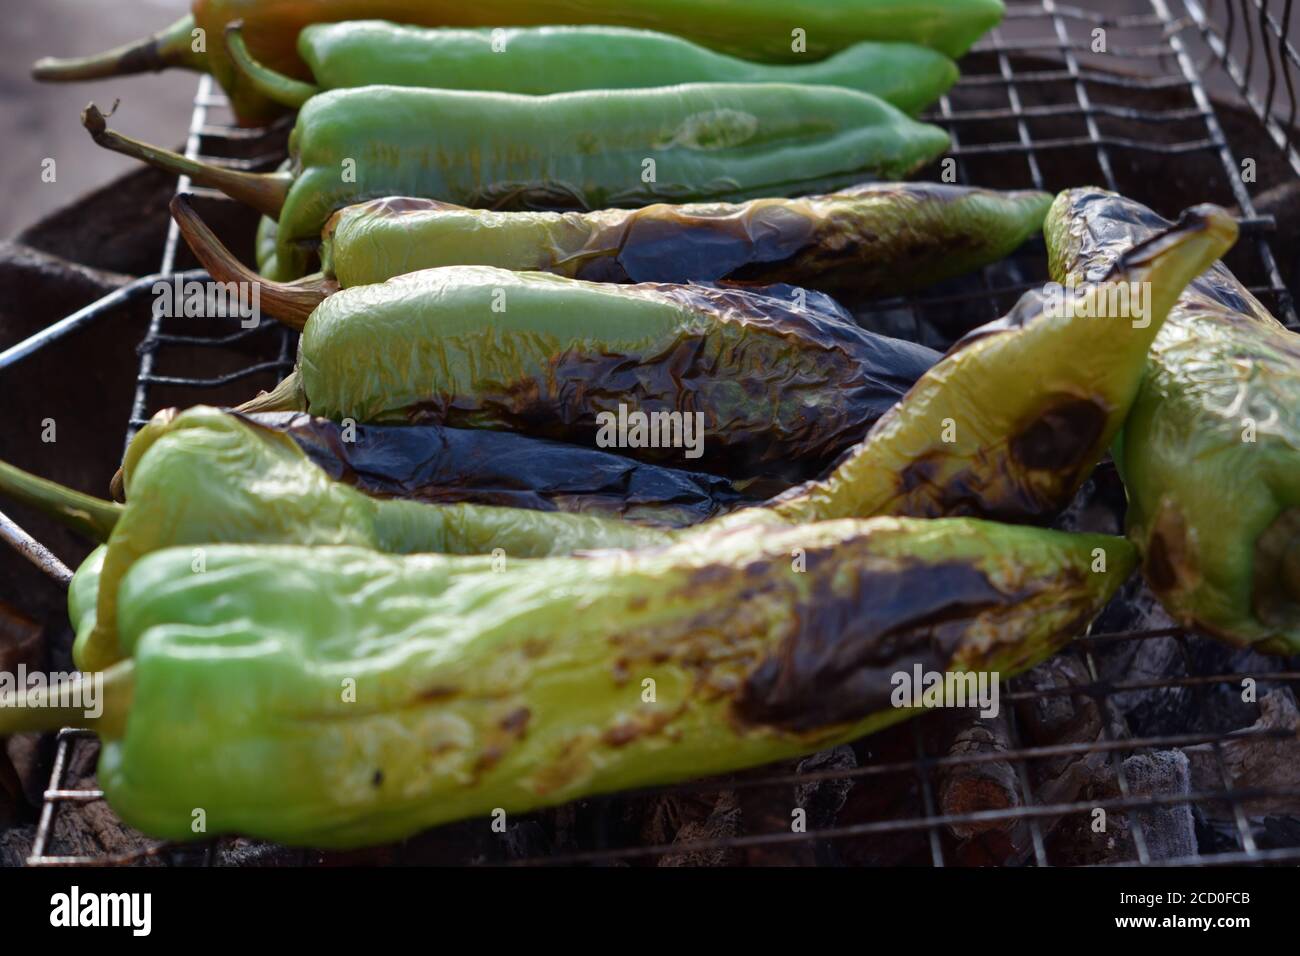 green peppers grilling on the barbecue for healthy lifestyle eating Stock Photo